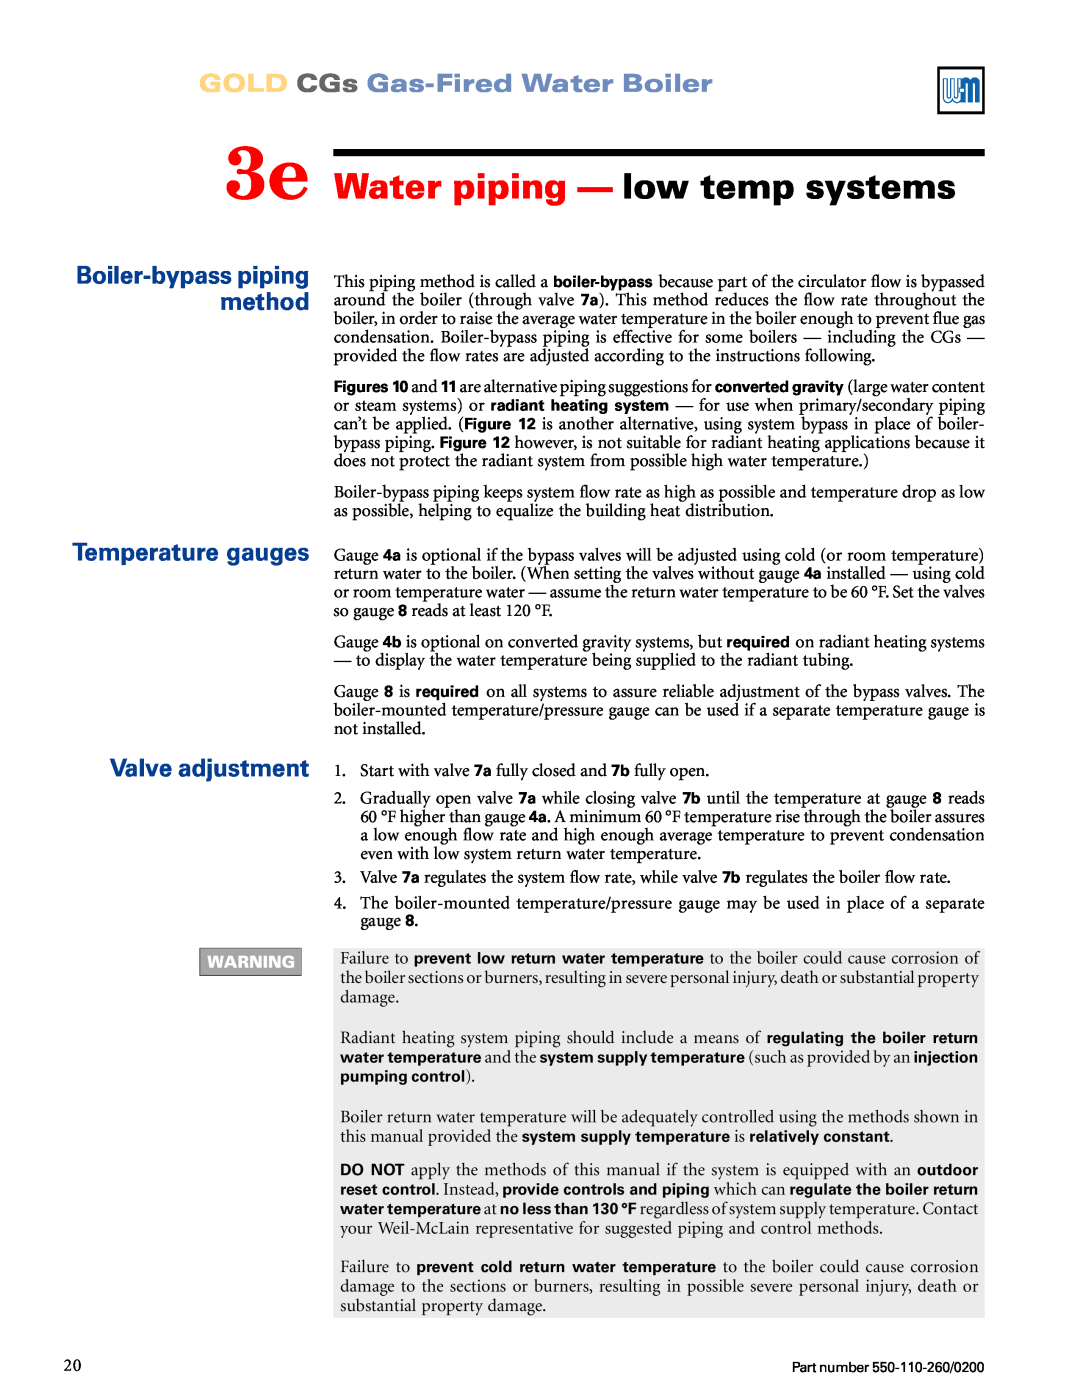 Weil-McLain 550-110-260/02002 manual 3e Water piping - low temp systems, GOLD CGs Gas-FiredWater Boiler 